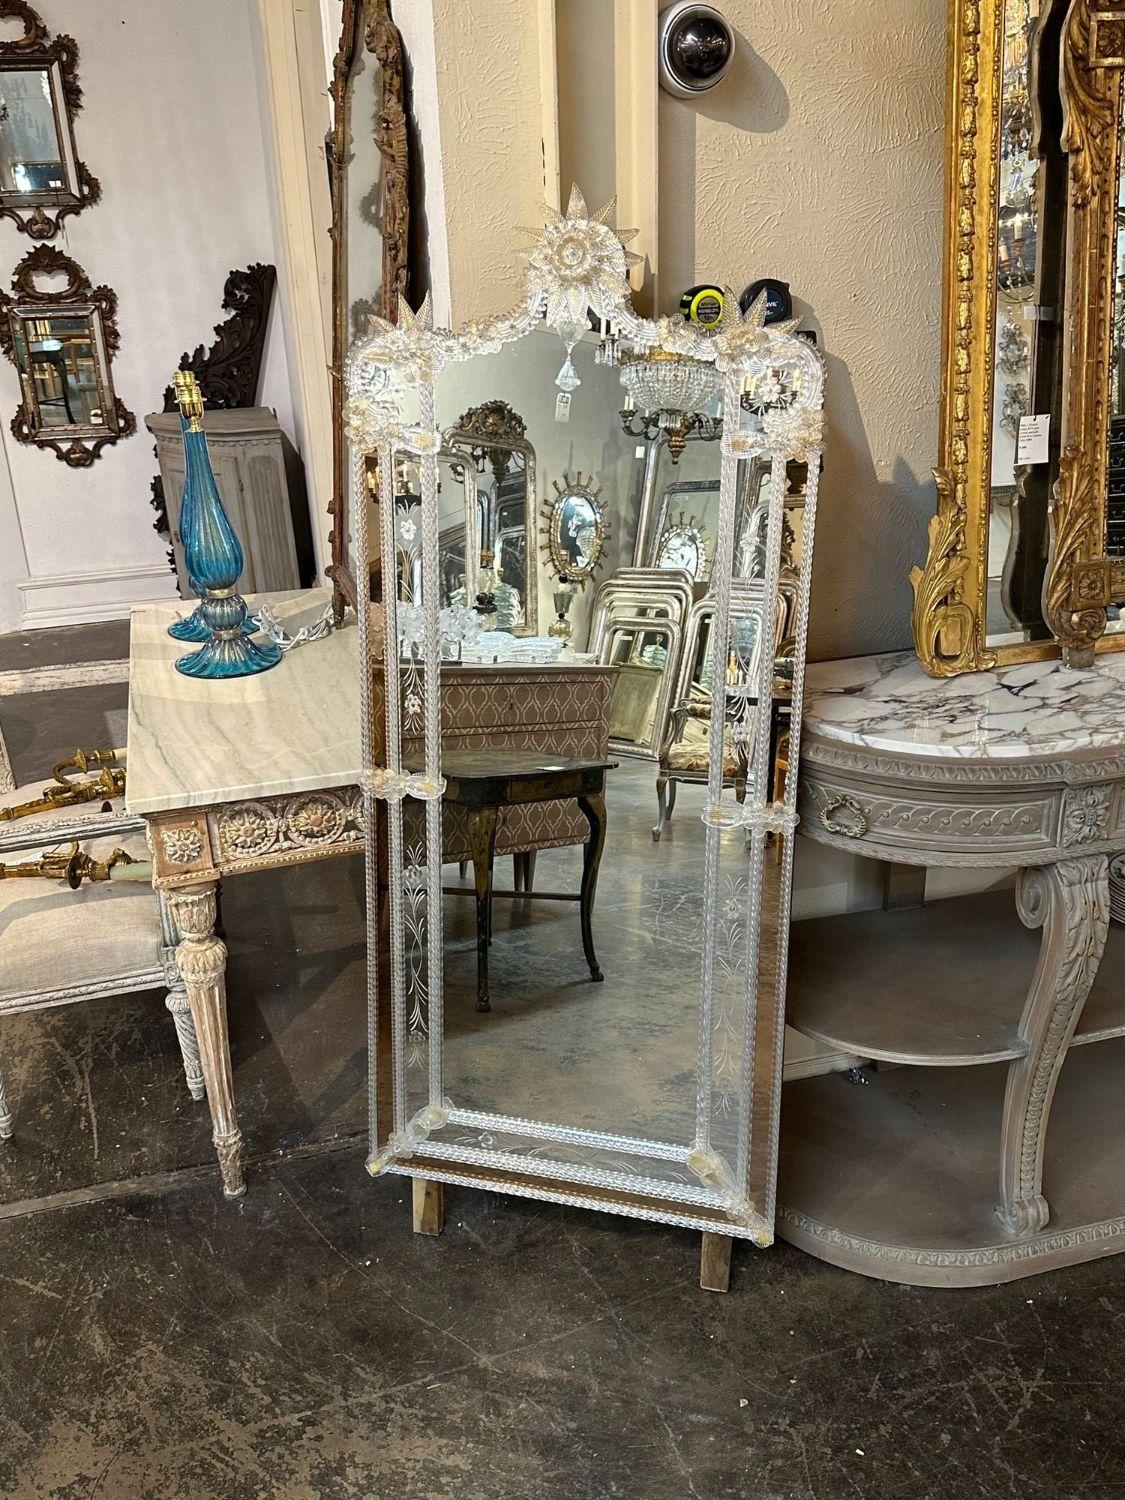 Very fine vintage Italian narrow Venetian Etched mirror. Featuring beautiful floral etched images and glass flowers and leaves. Lovely!